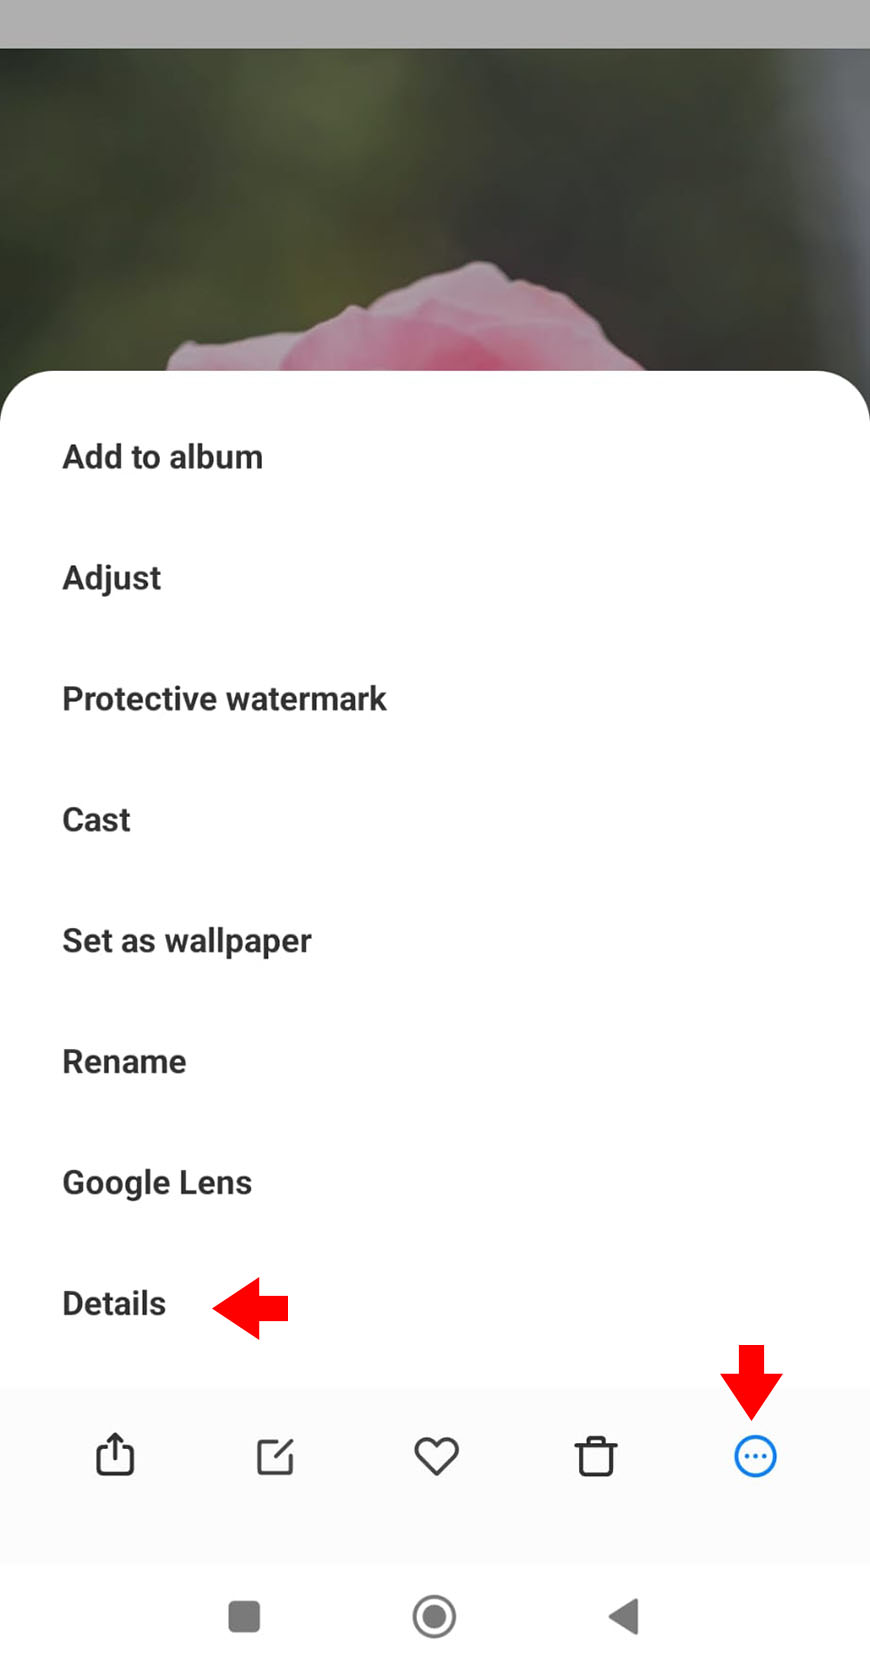 Smartphone screenshot showing a photo viewer app interface with options for image management, such as adding to an album and accessing google lens, highlighted by two red arrows pointing to 'google lens' and 'details.